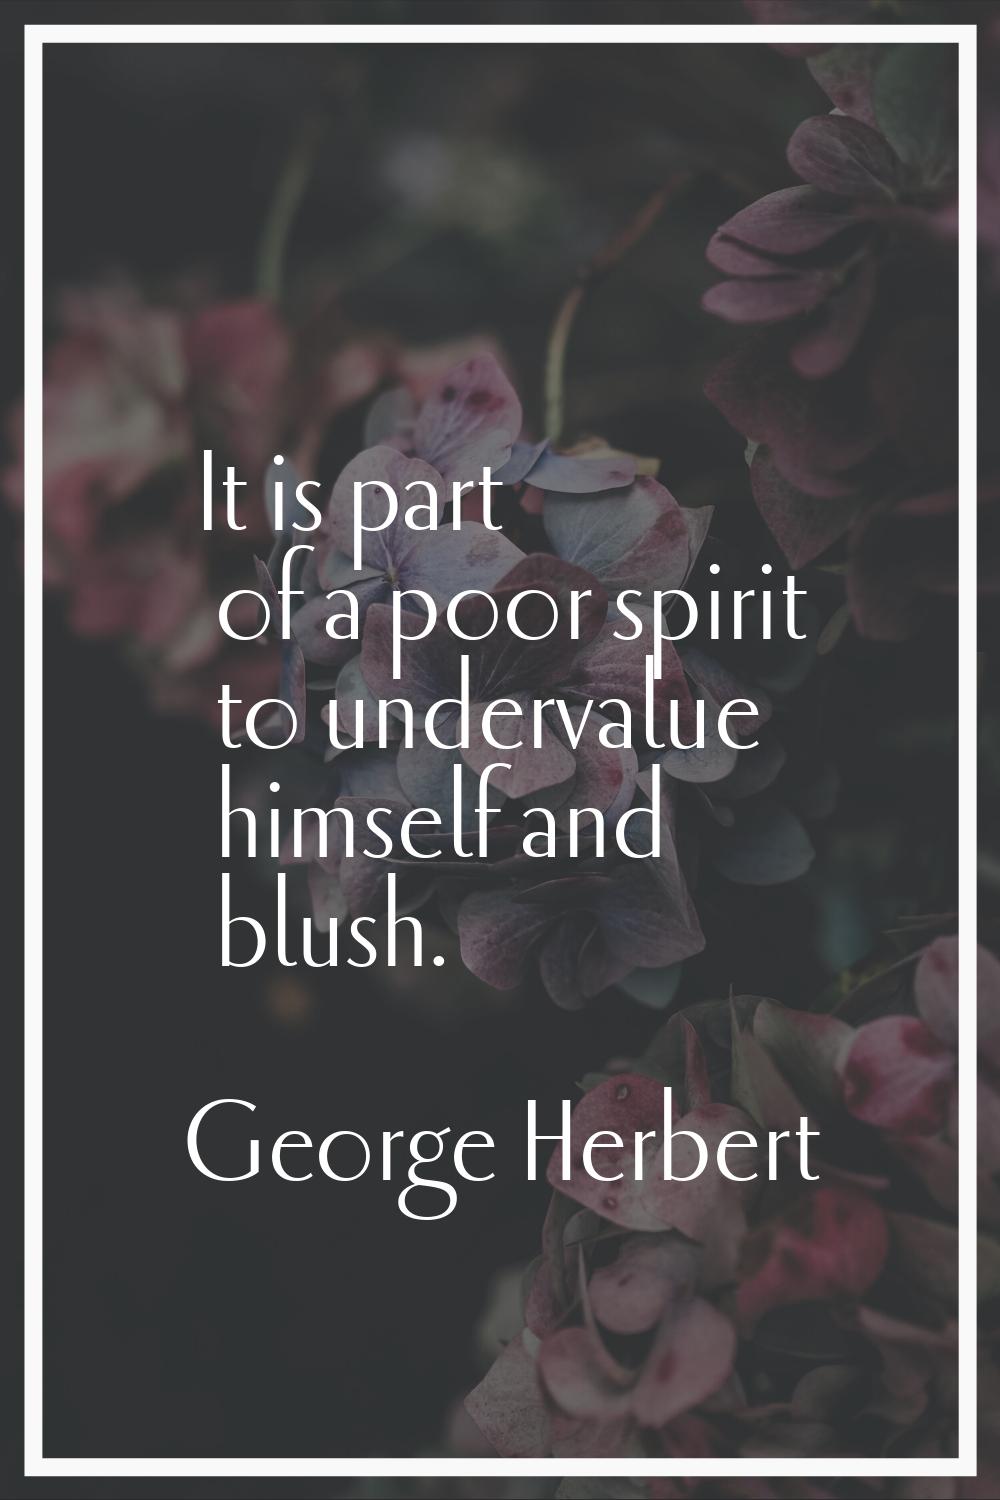 It is part of a poor spirit to undervalue himself and blush.